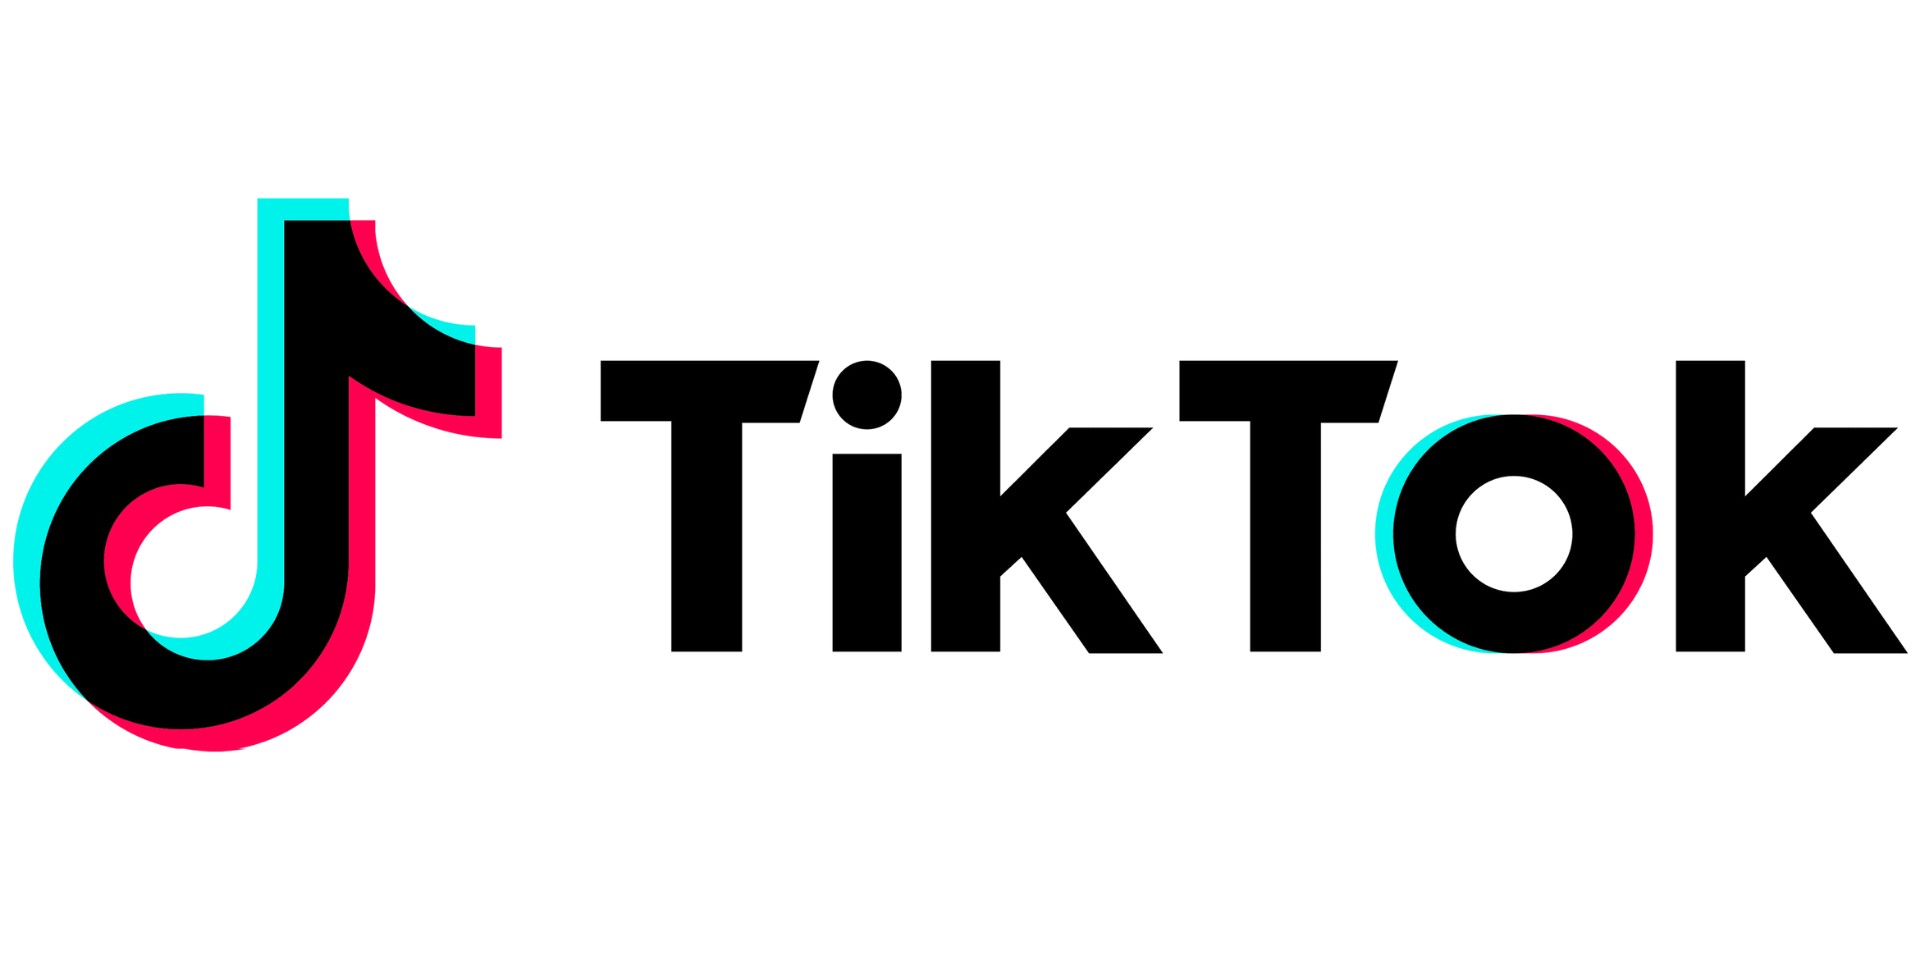 TikTok reports exponential increase in K-pop content - Top artists include BTS, STAYC, BLACKPINK, ROSÉ, TXT, and more